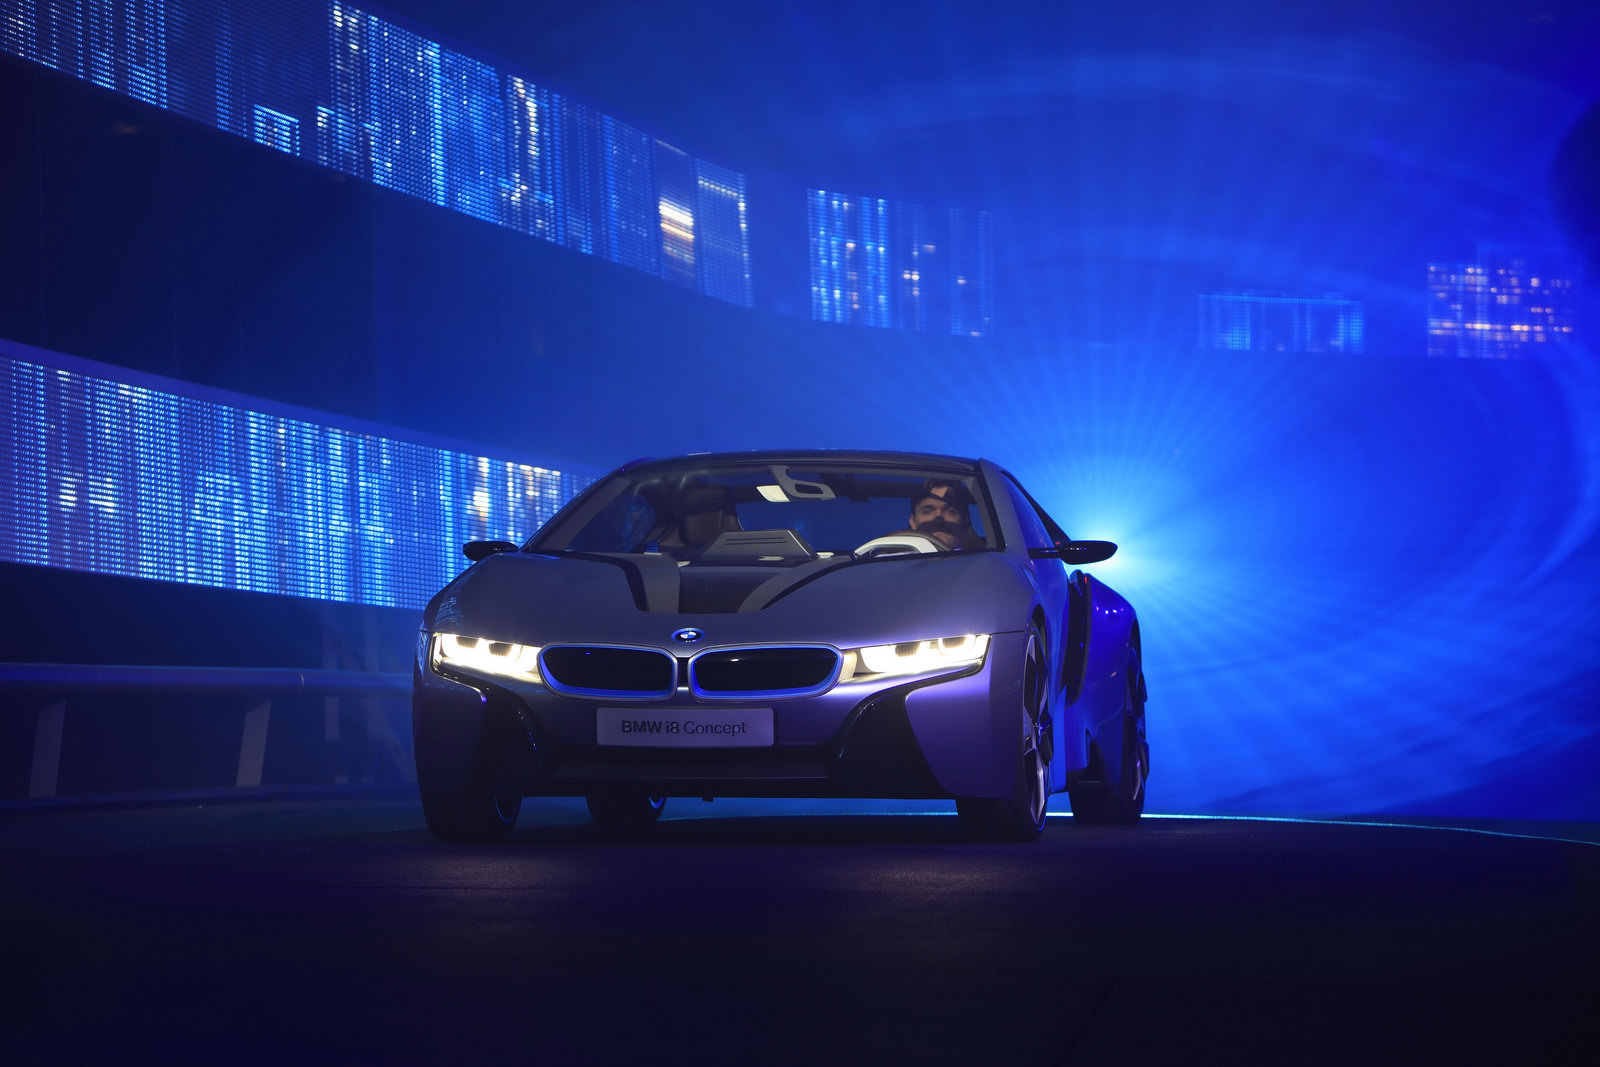 BMW reveals the new i8 Concept, a 349HP plug-in hybrid sports car